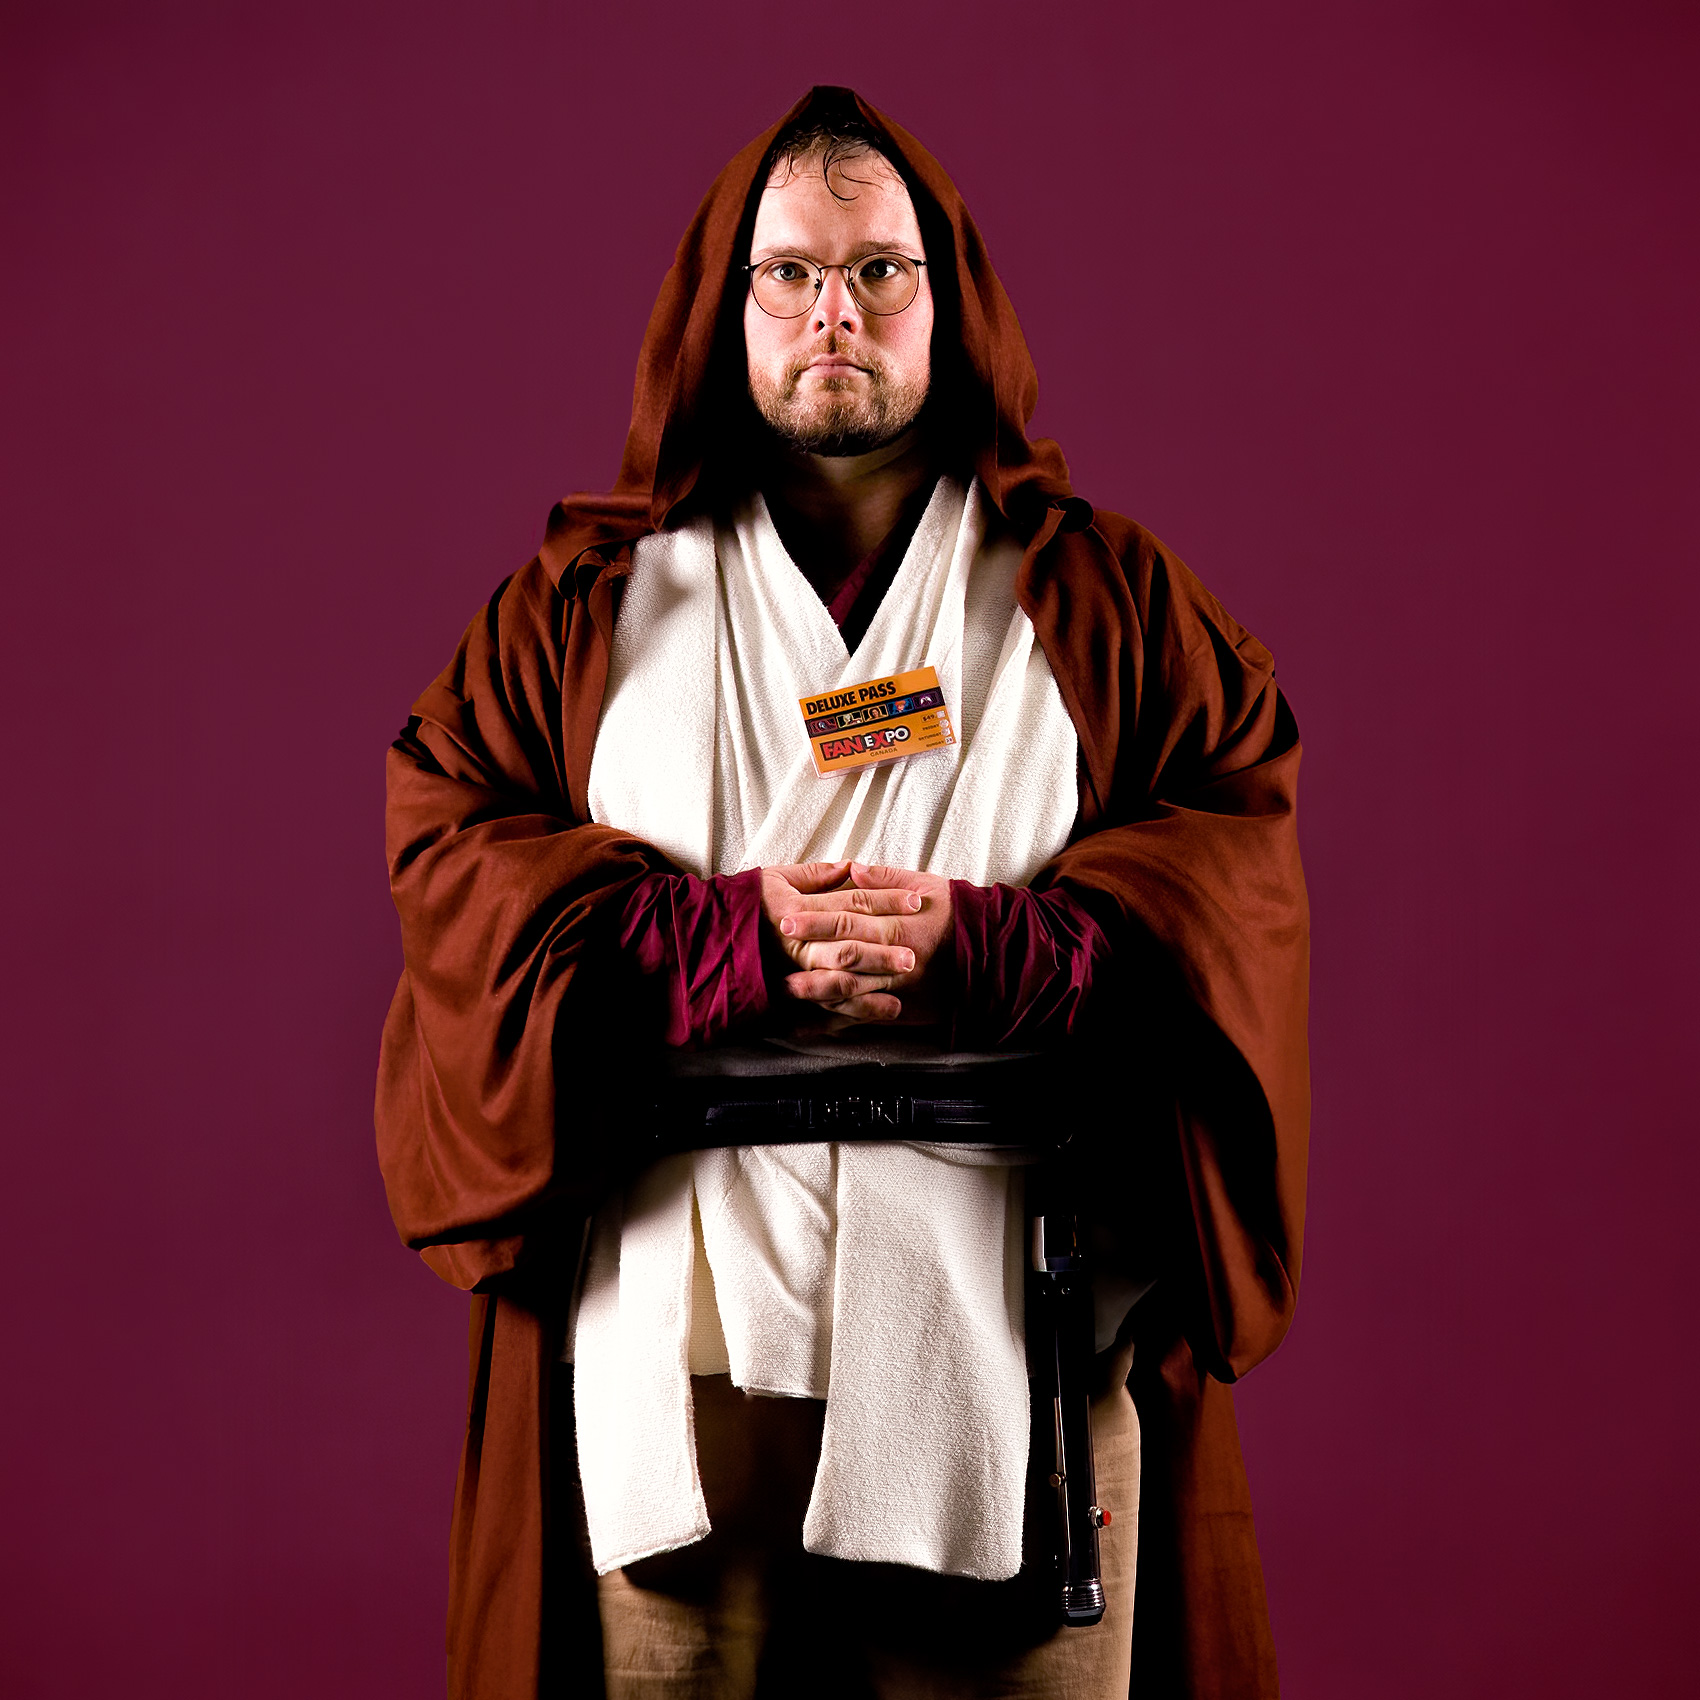 a-man-impersonates-luke-skywalker-from-the-star-wars-franchise-at-toronto-fan-expo